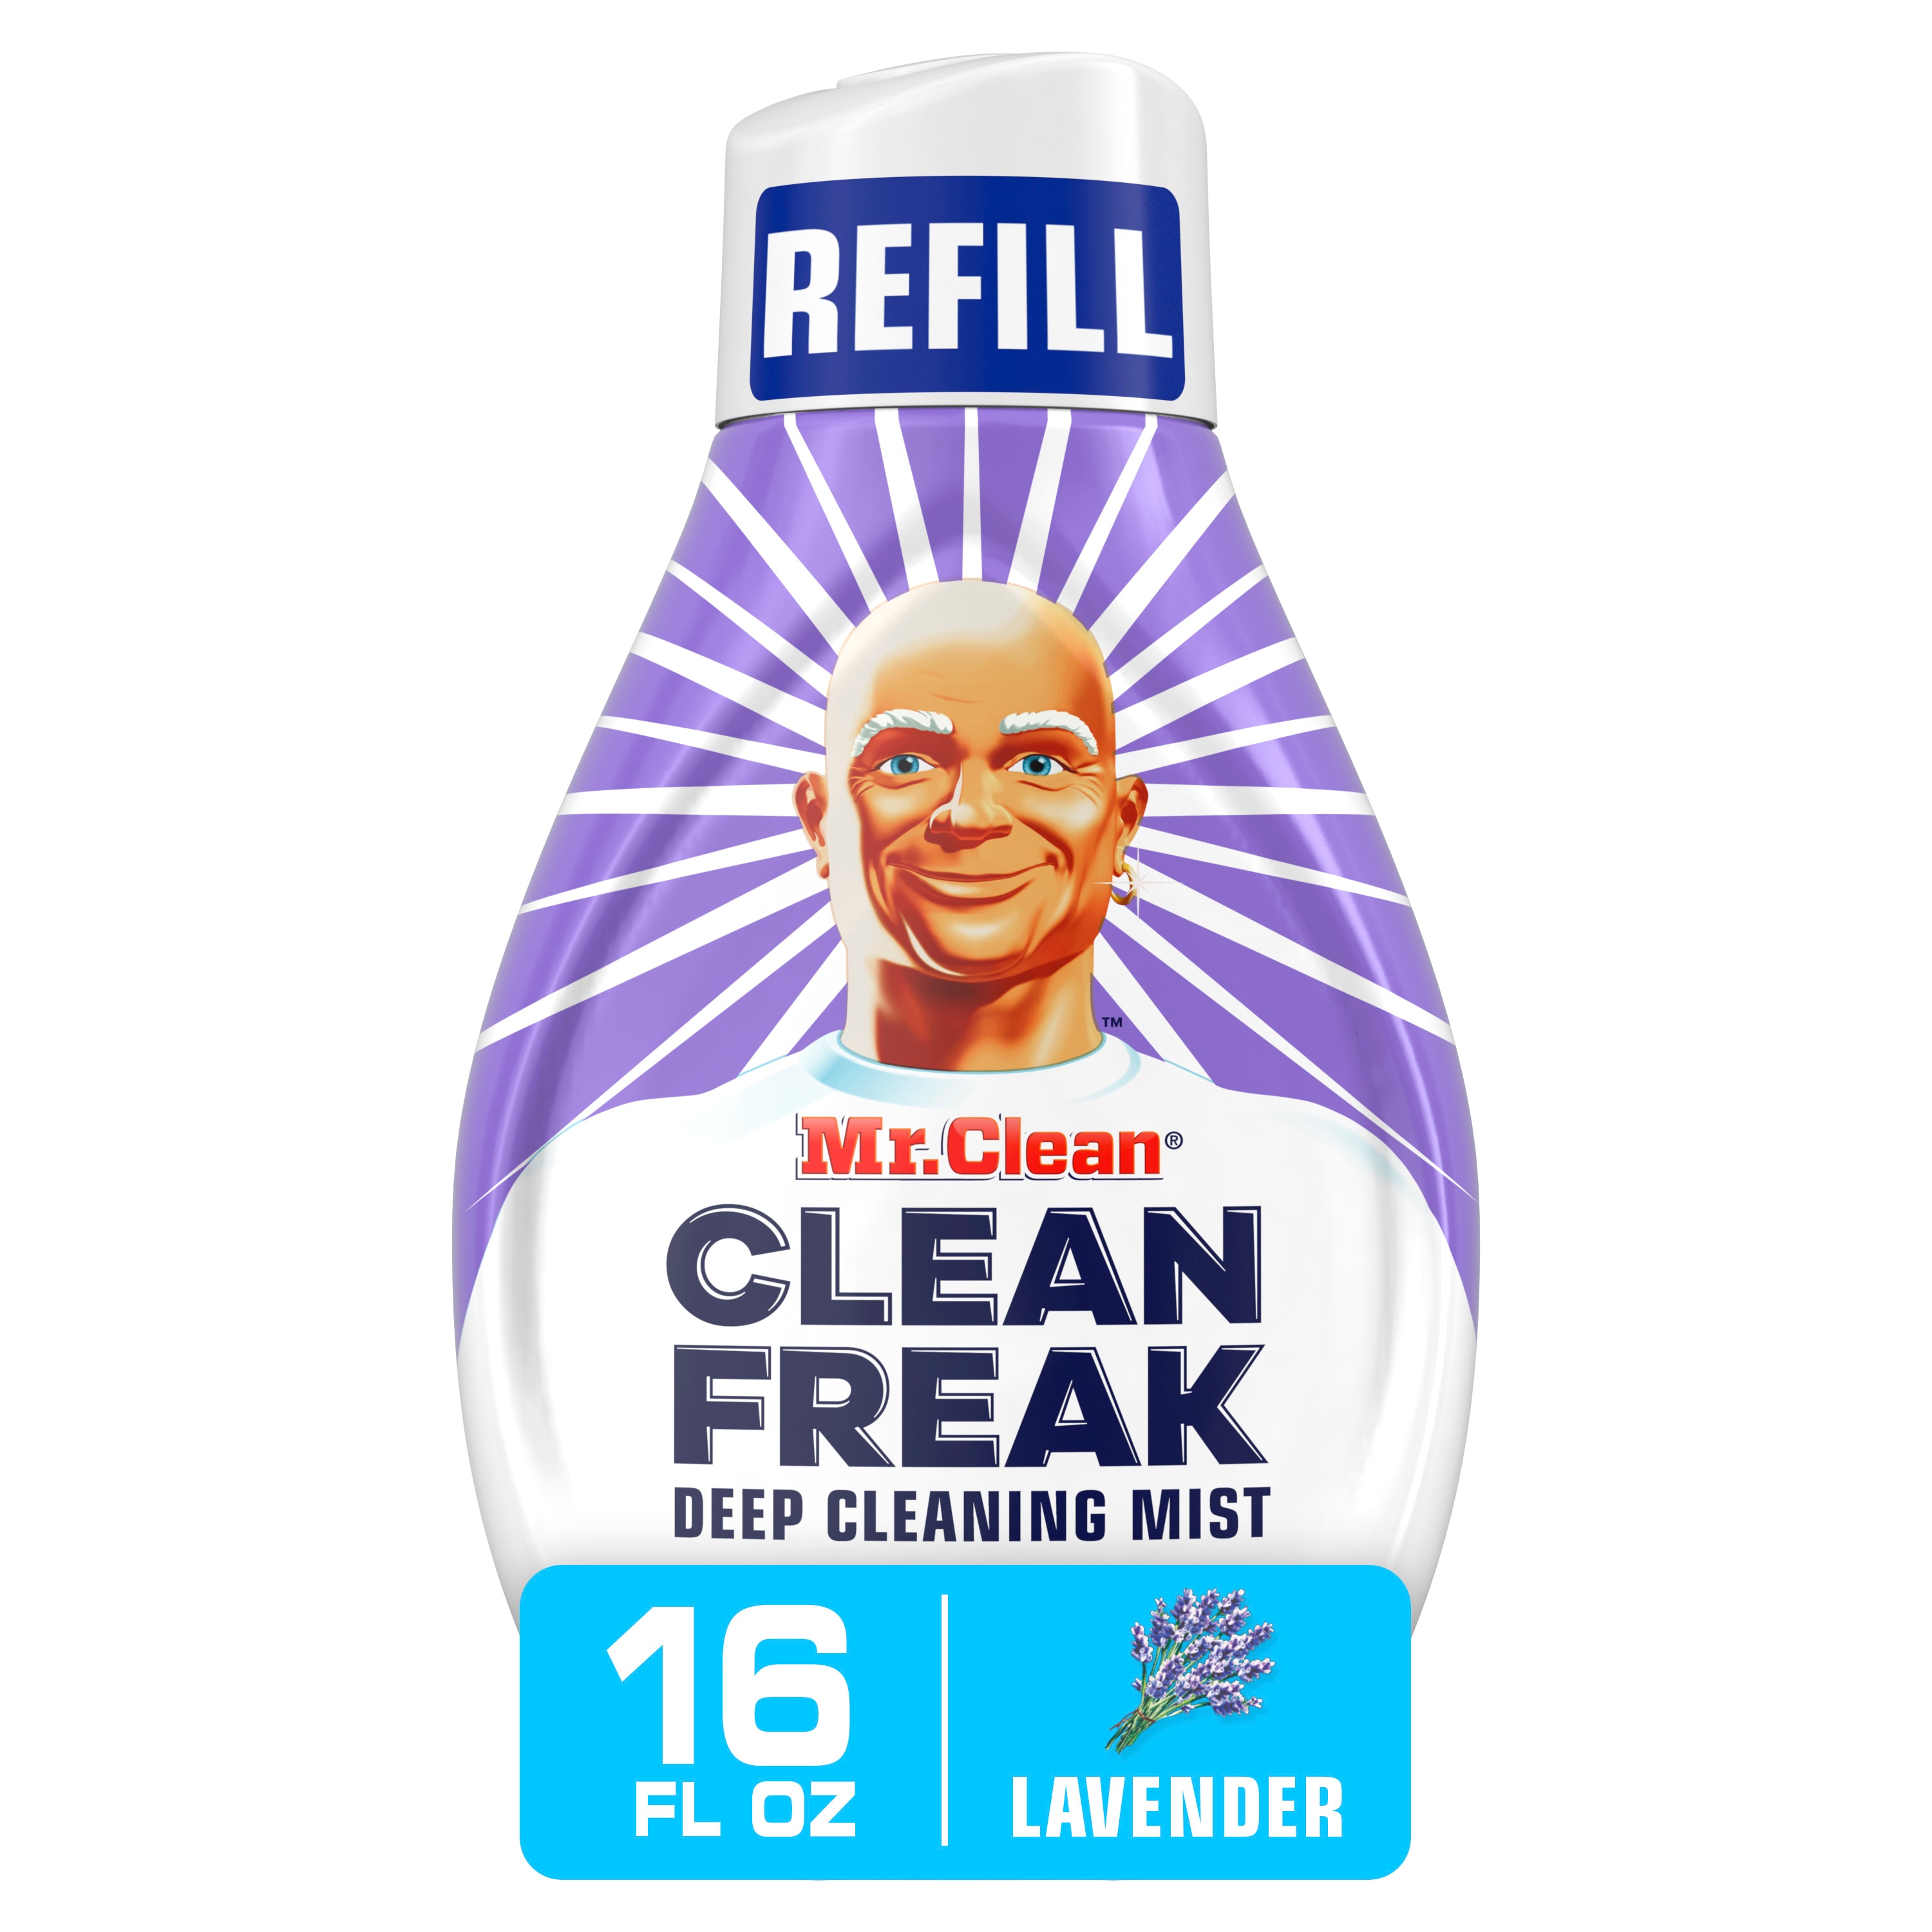  Mr. Clean All Purpose Cleaner, Clean Freak Mist Cleaning Kit  for Bathroom & Kitchen Cleaner, Lemon Scent, Includes 1 Spray Bottle (16  oz) and 1 Large Refill (30.9 oz) : Health & Household